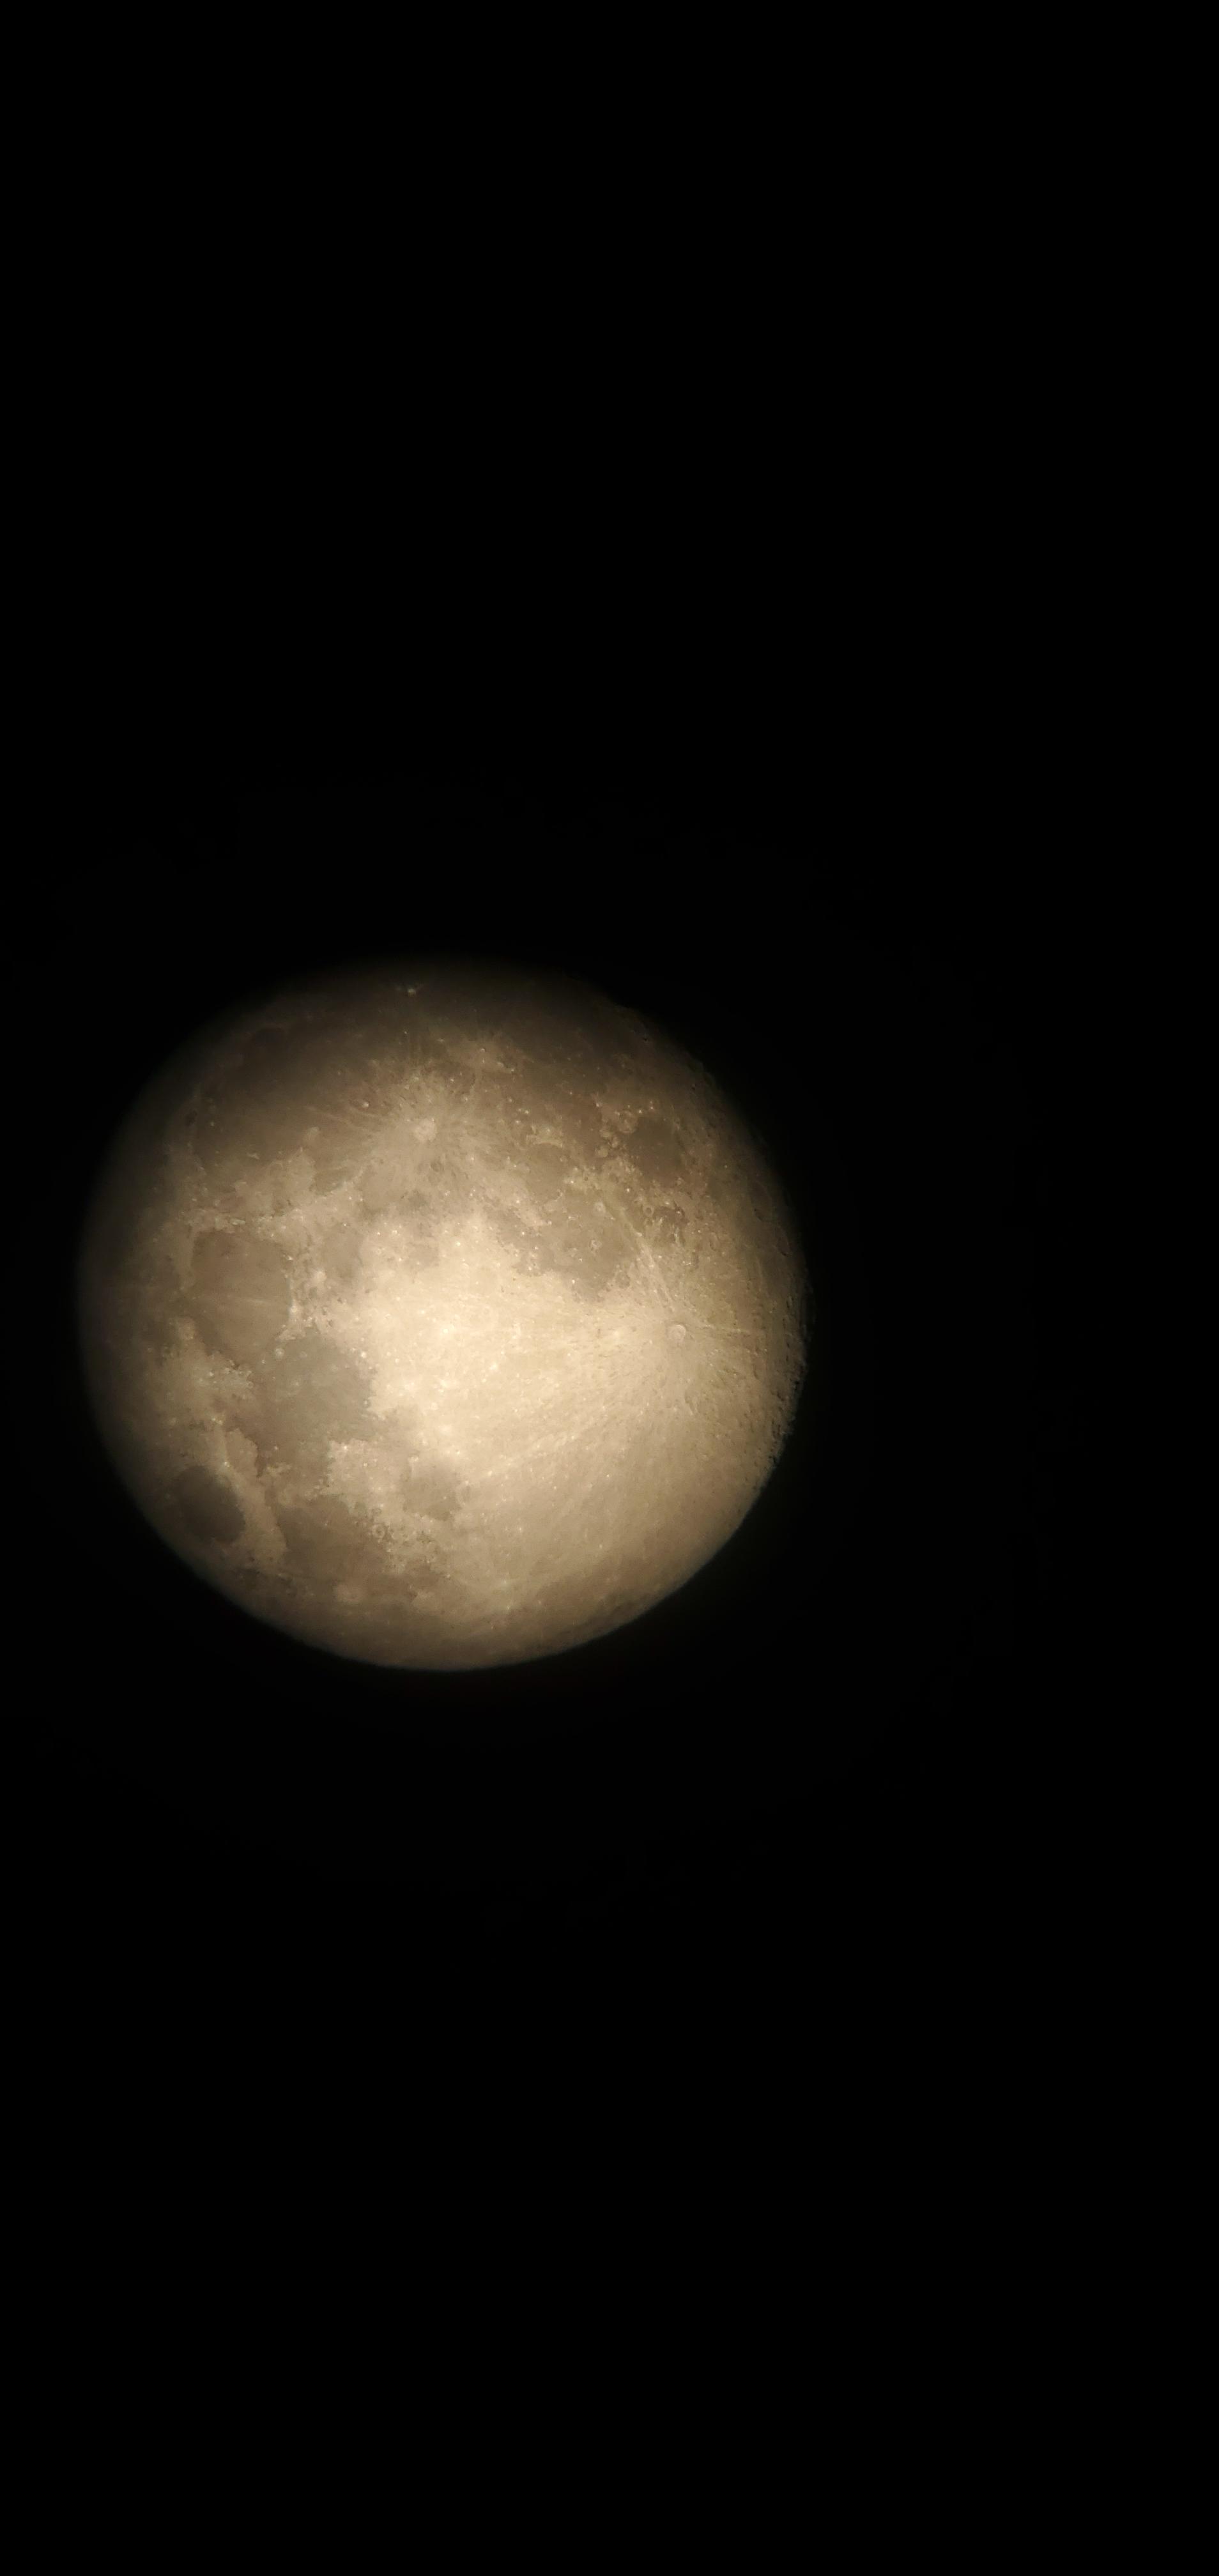 Captured the moon through a professional grade telescope on pro